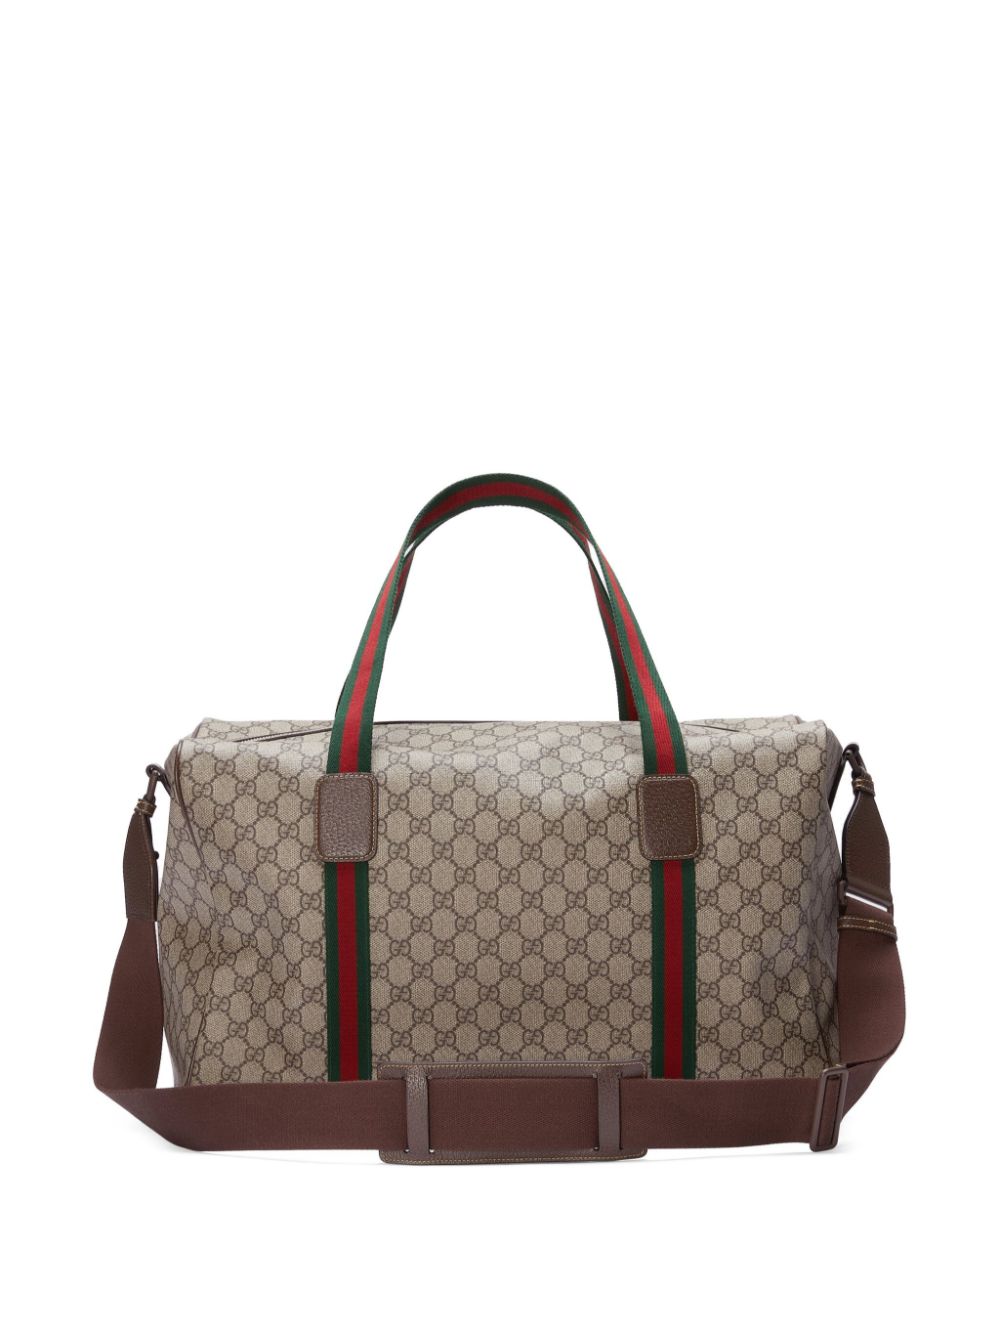 Gucci Neutral gg Supreme Large Duffle Bag - Unisex - Canvas/leather in  Brown